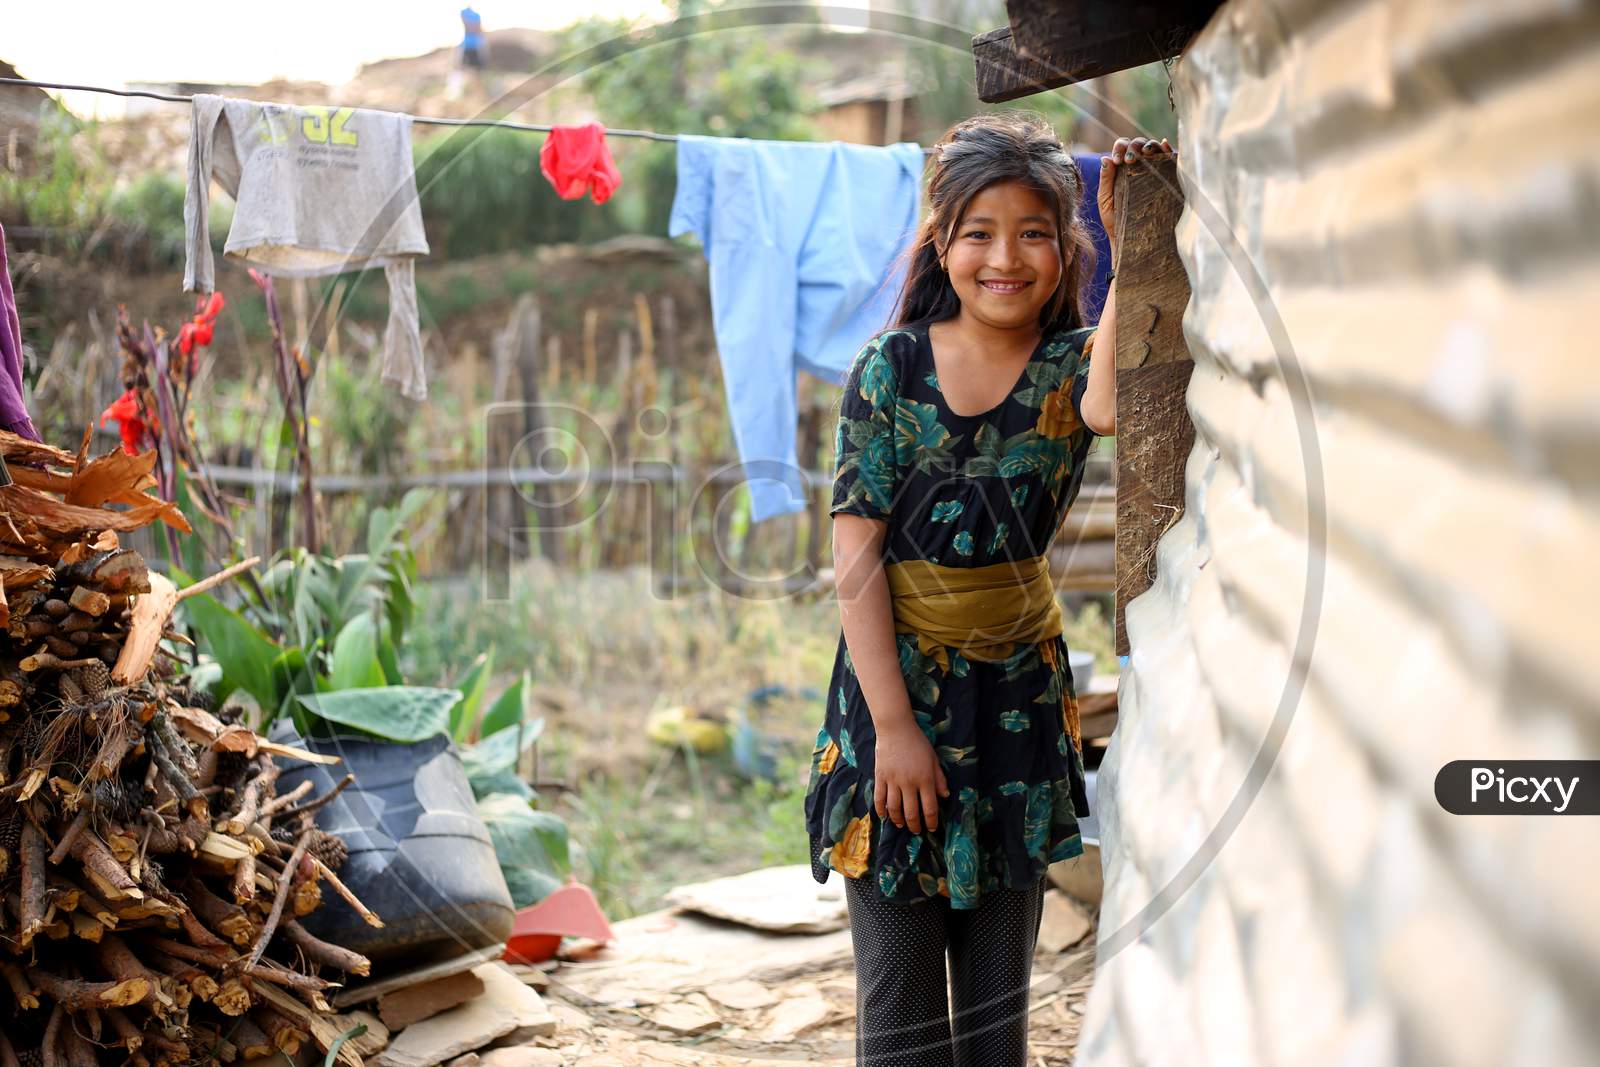 A shy, rural girl smiling and looking into the camera. Rural life photo.